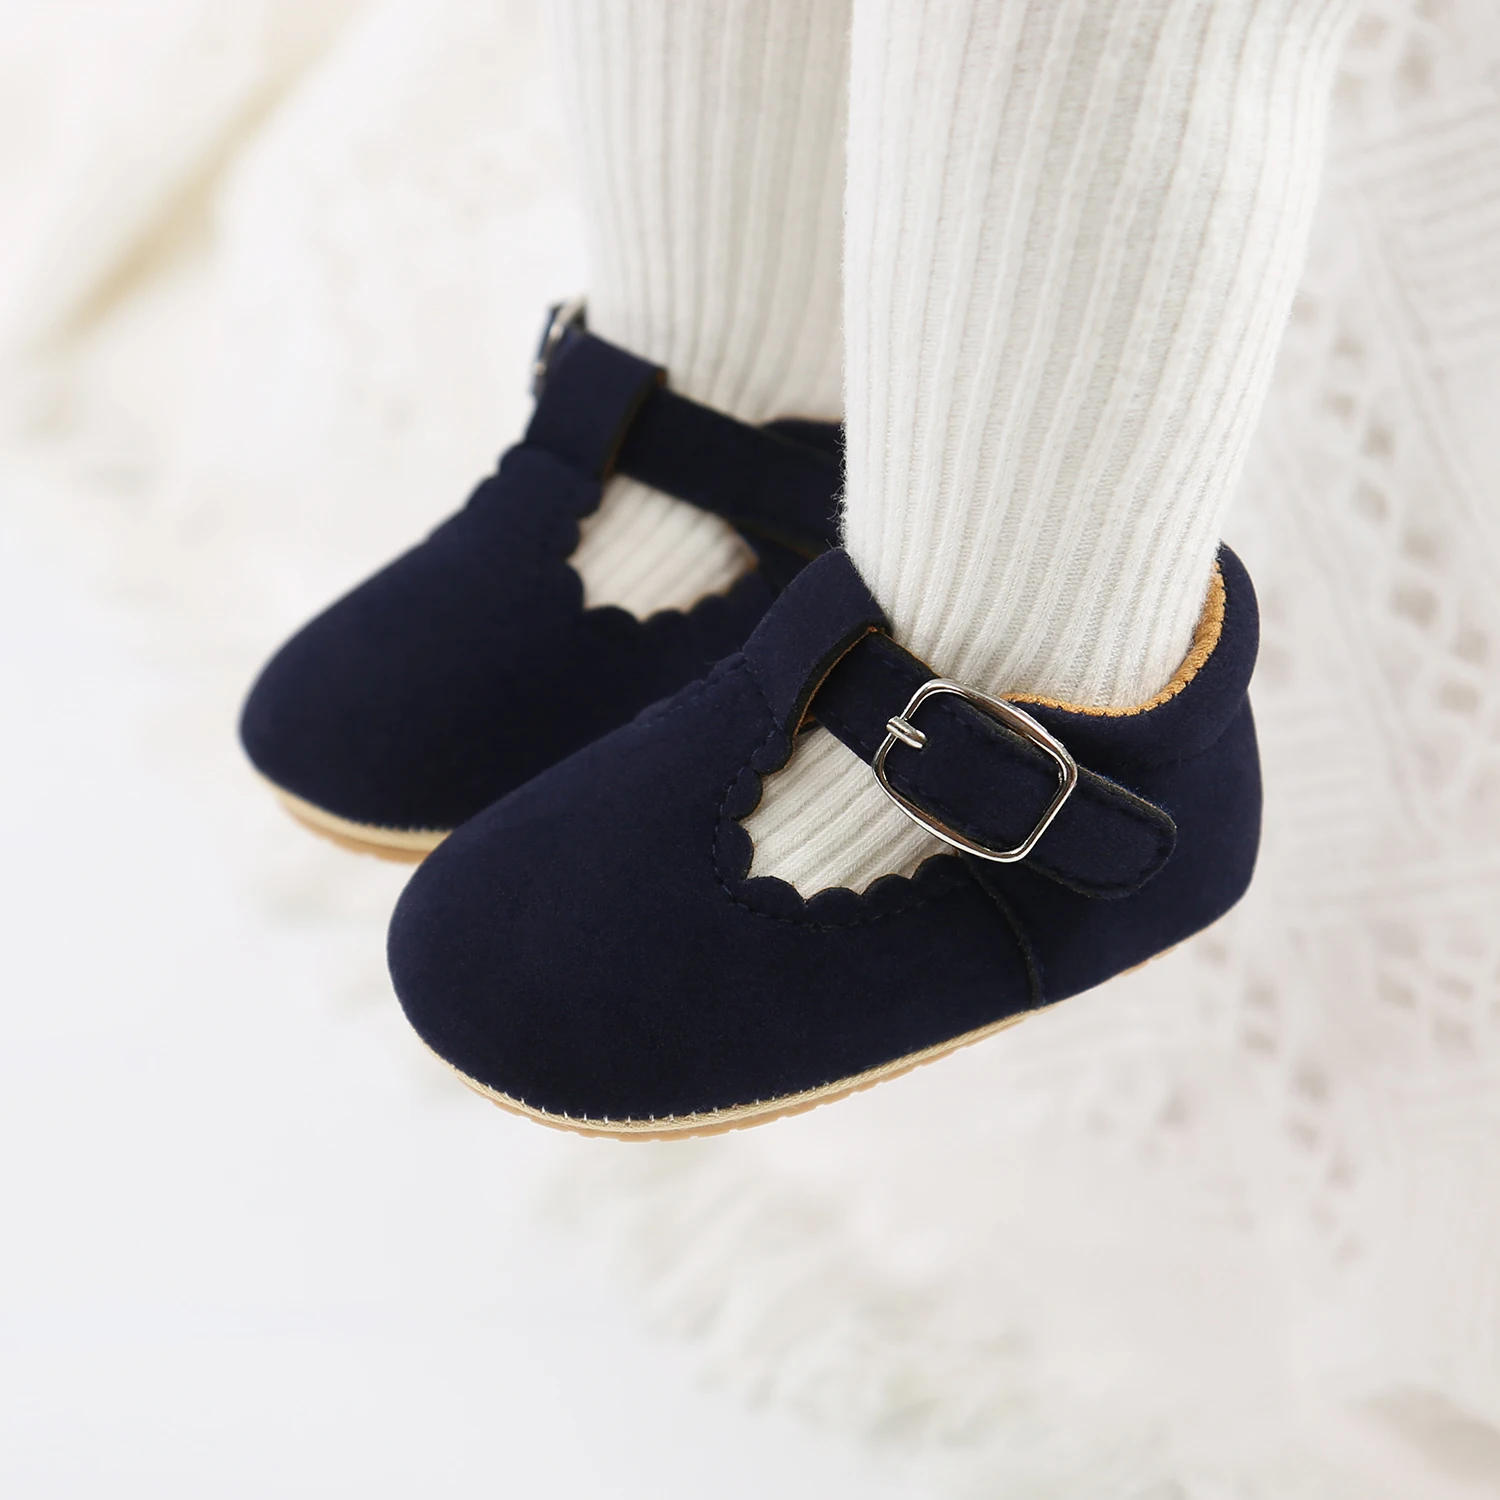 Vintage Baby Shoes Newborn Infant Boy Girl Classical PU Soft Anti-slip Toddler Crib Crawl Shoes Moccasins 10-colors images - 6